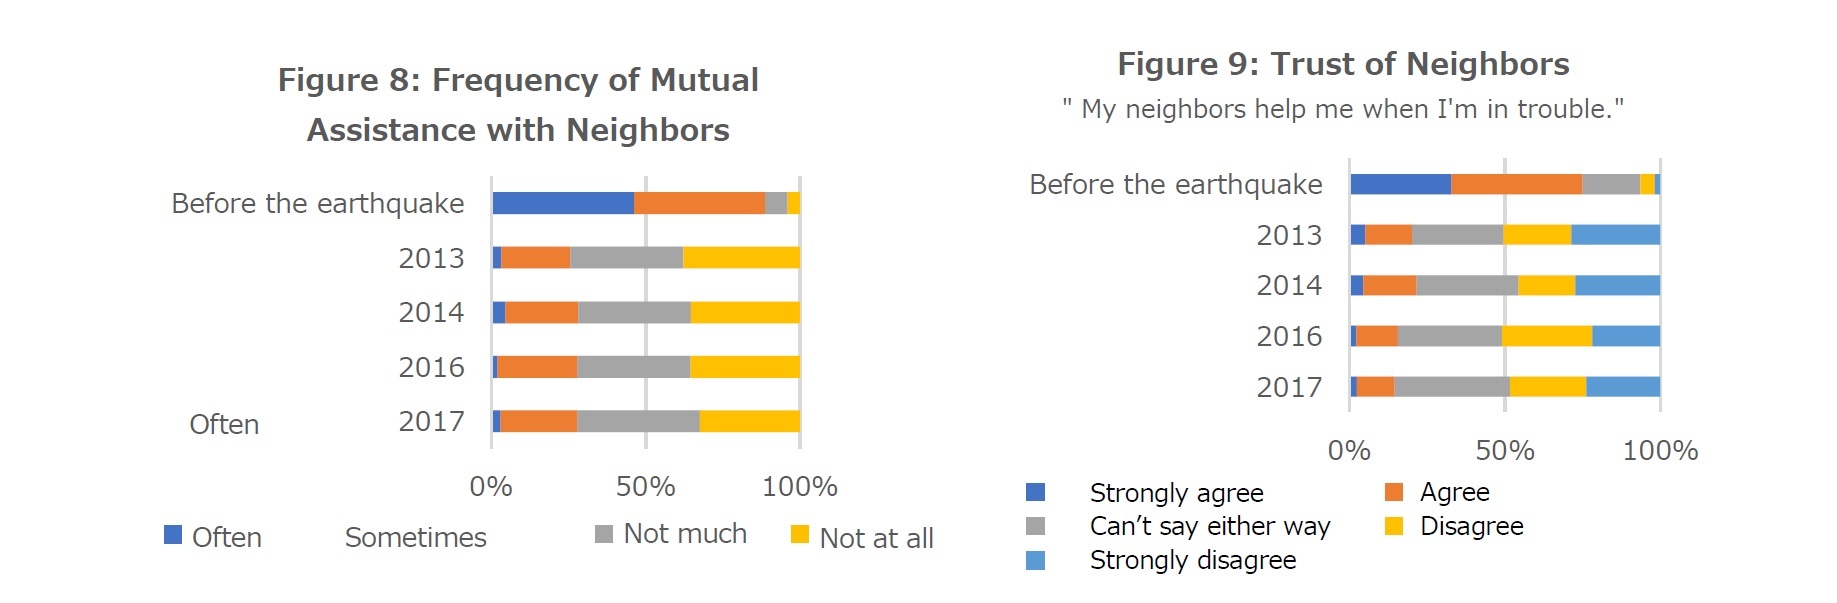 Figure 8: Frequency of Mutual Assistance with Neighbors/Figure 9: Trust of Neighbors